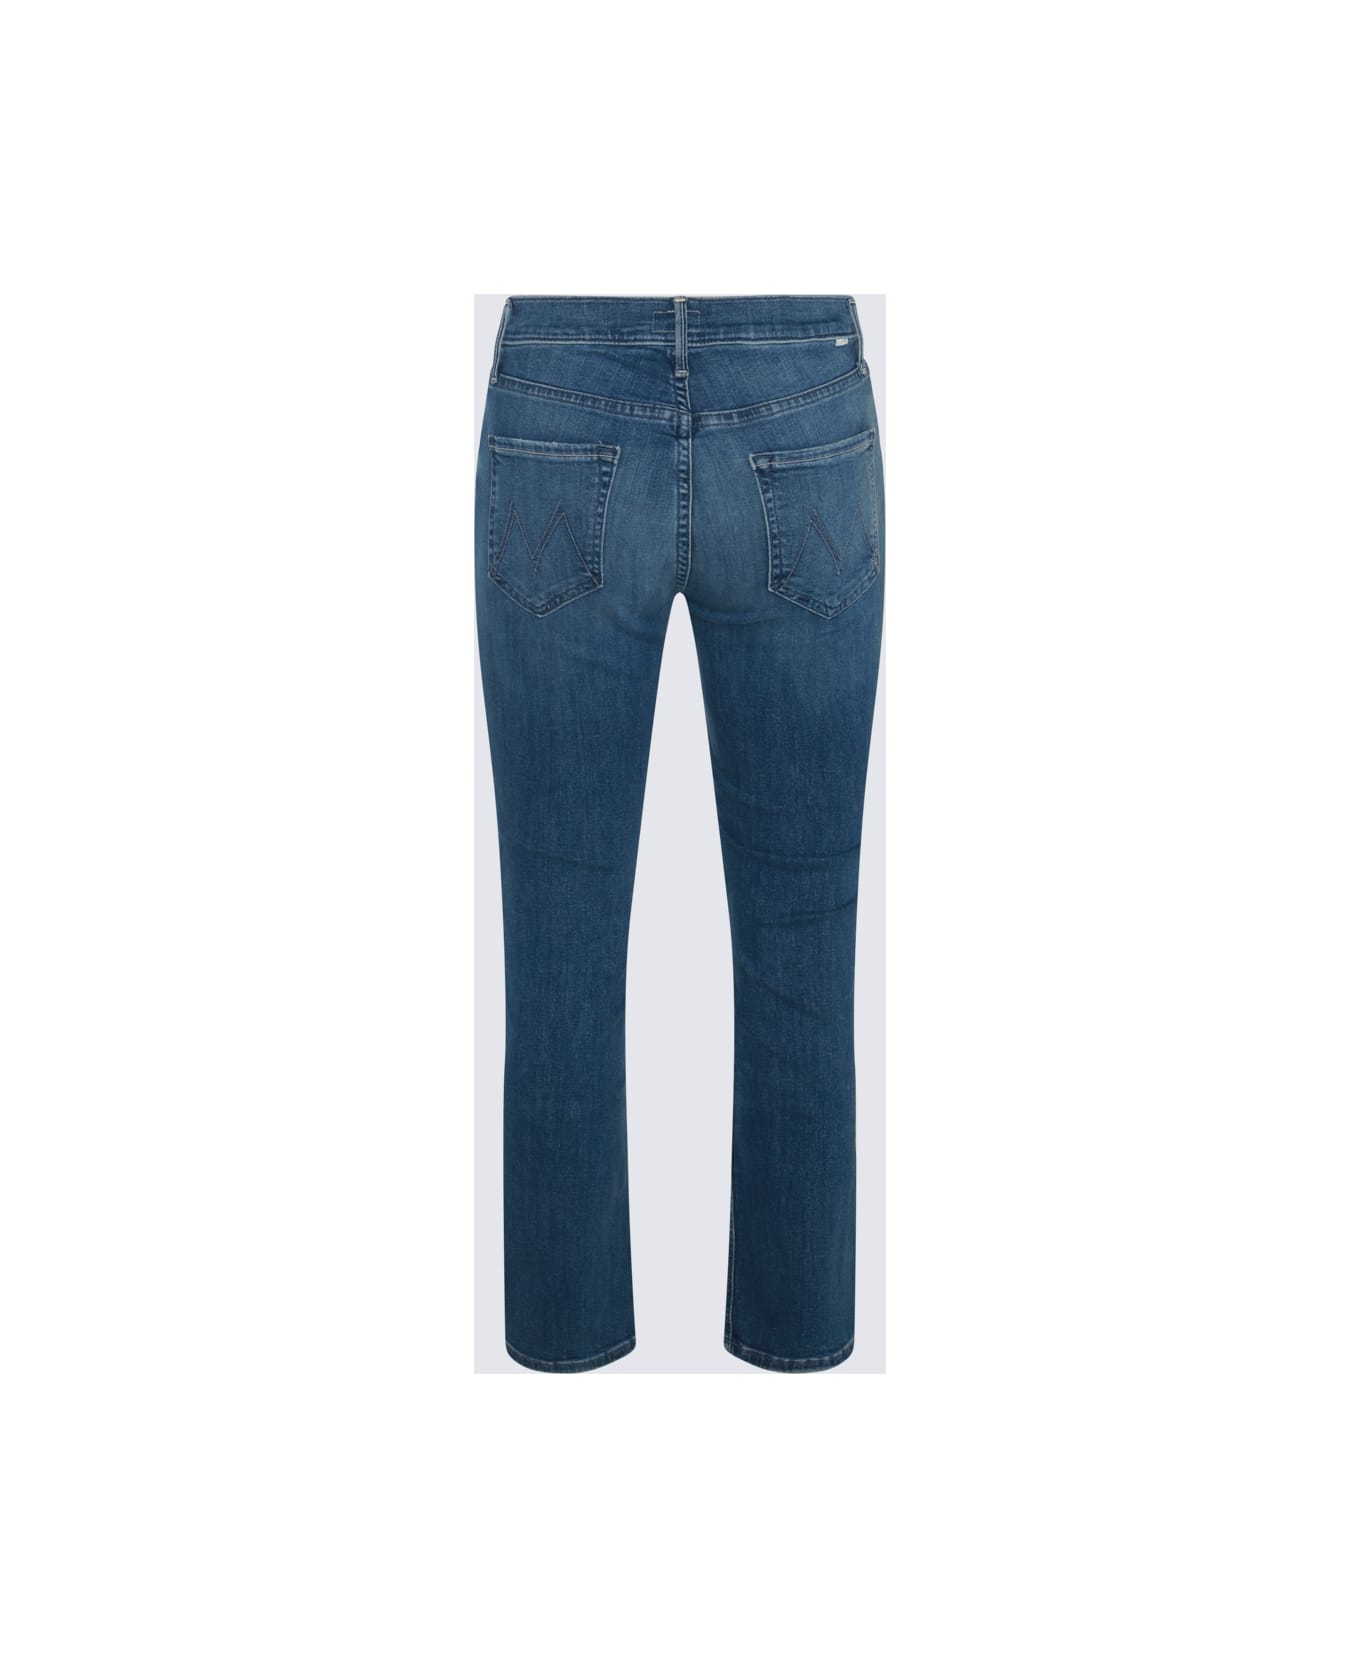 Mother Blue Cotton Denim Jeans - WISH ON A STAR